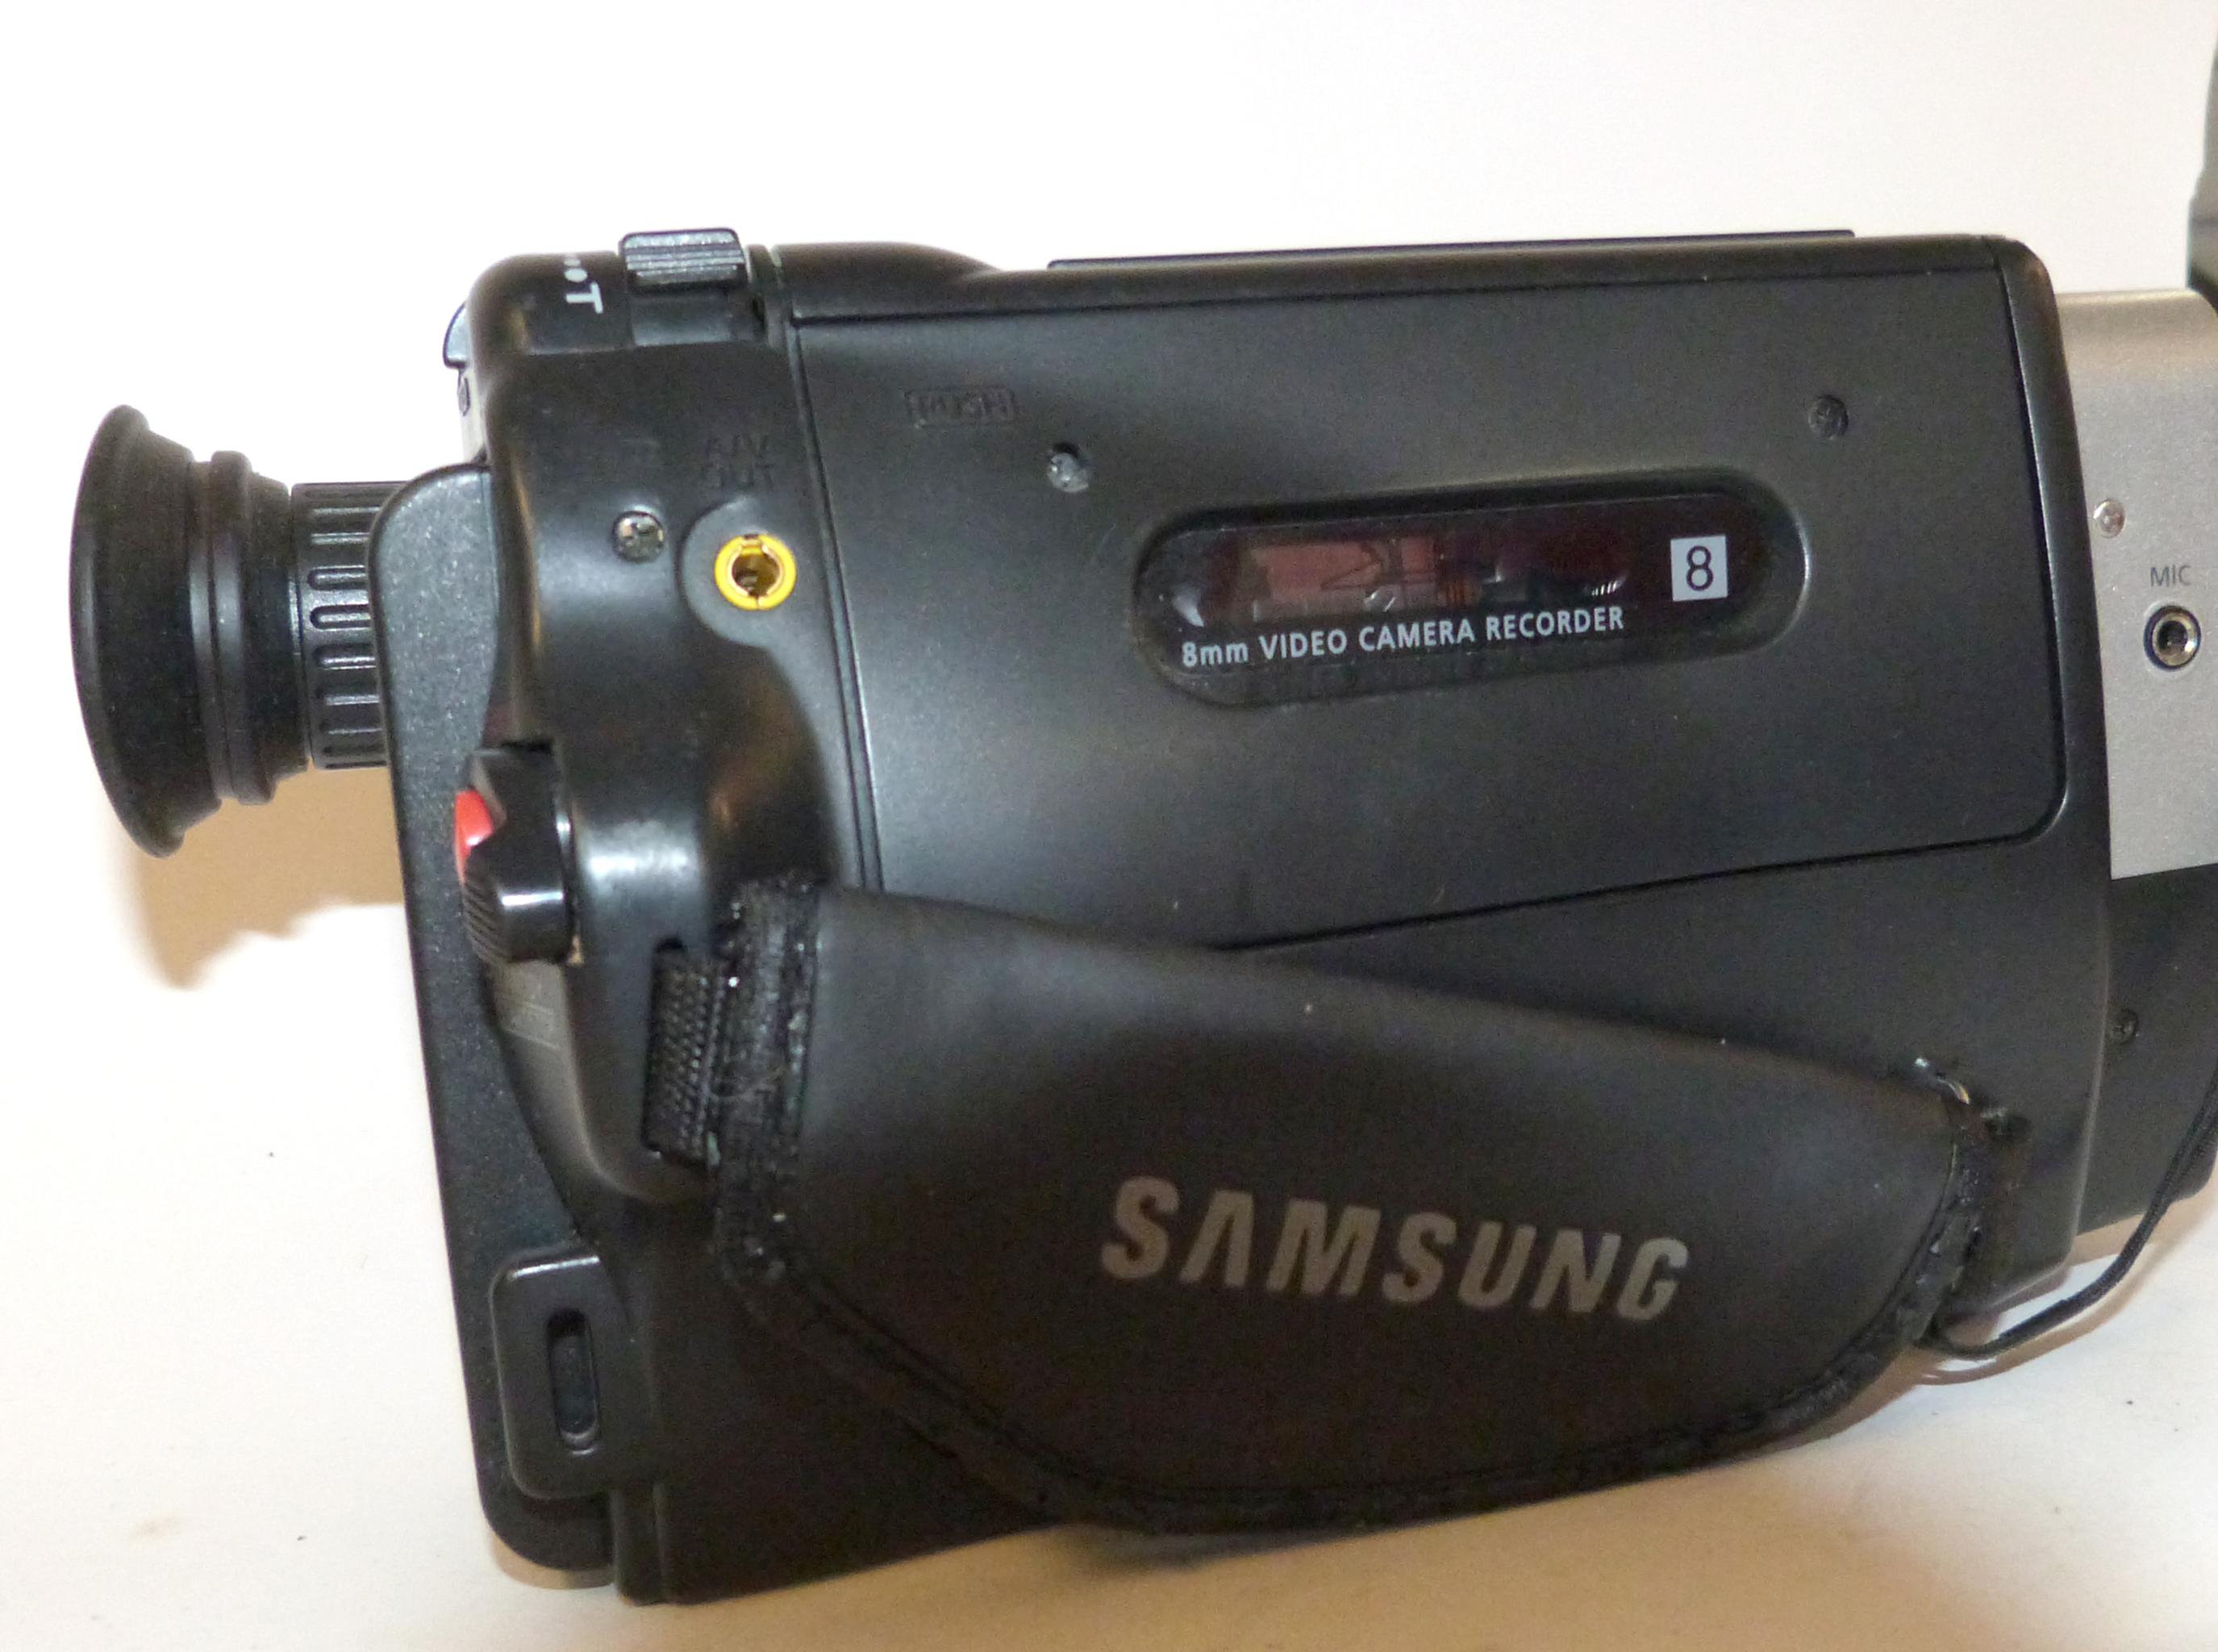 Samsung video camera VP-A30 with case and accessories - Image 4 of 6